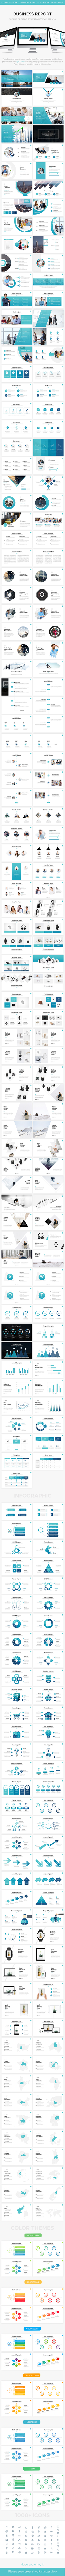 Business Anual Report  Powerpoint Template 2017